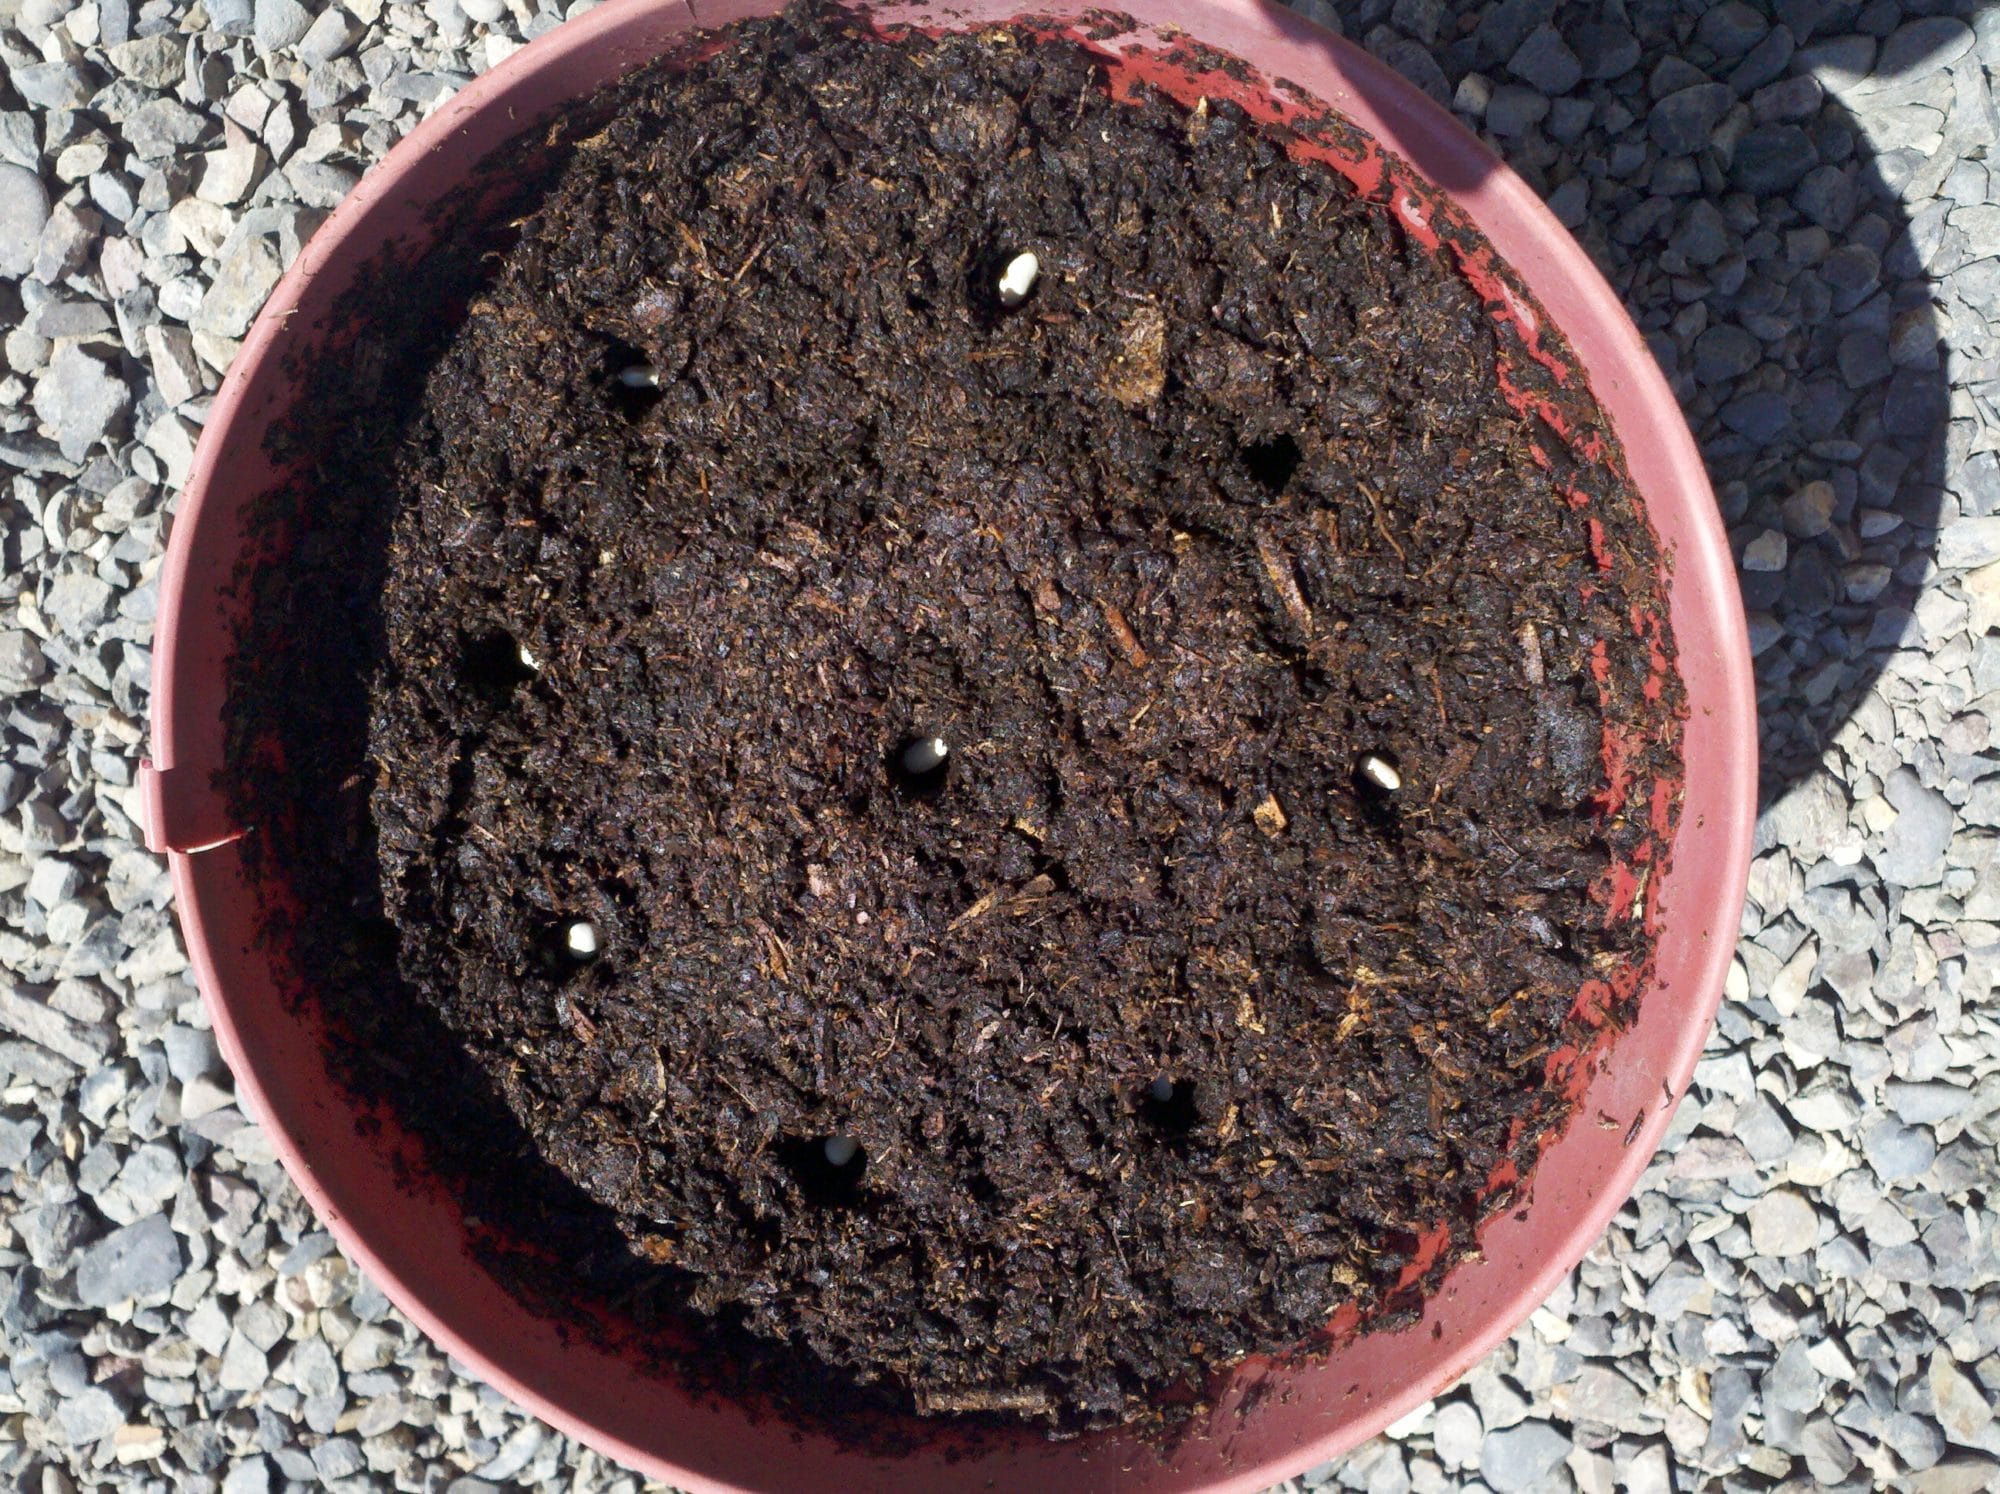 Pot with dirt and seeds in it